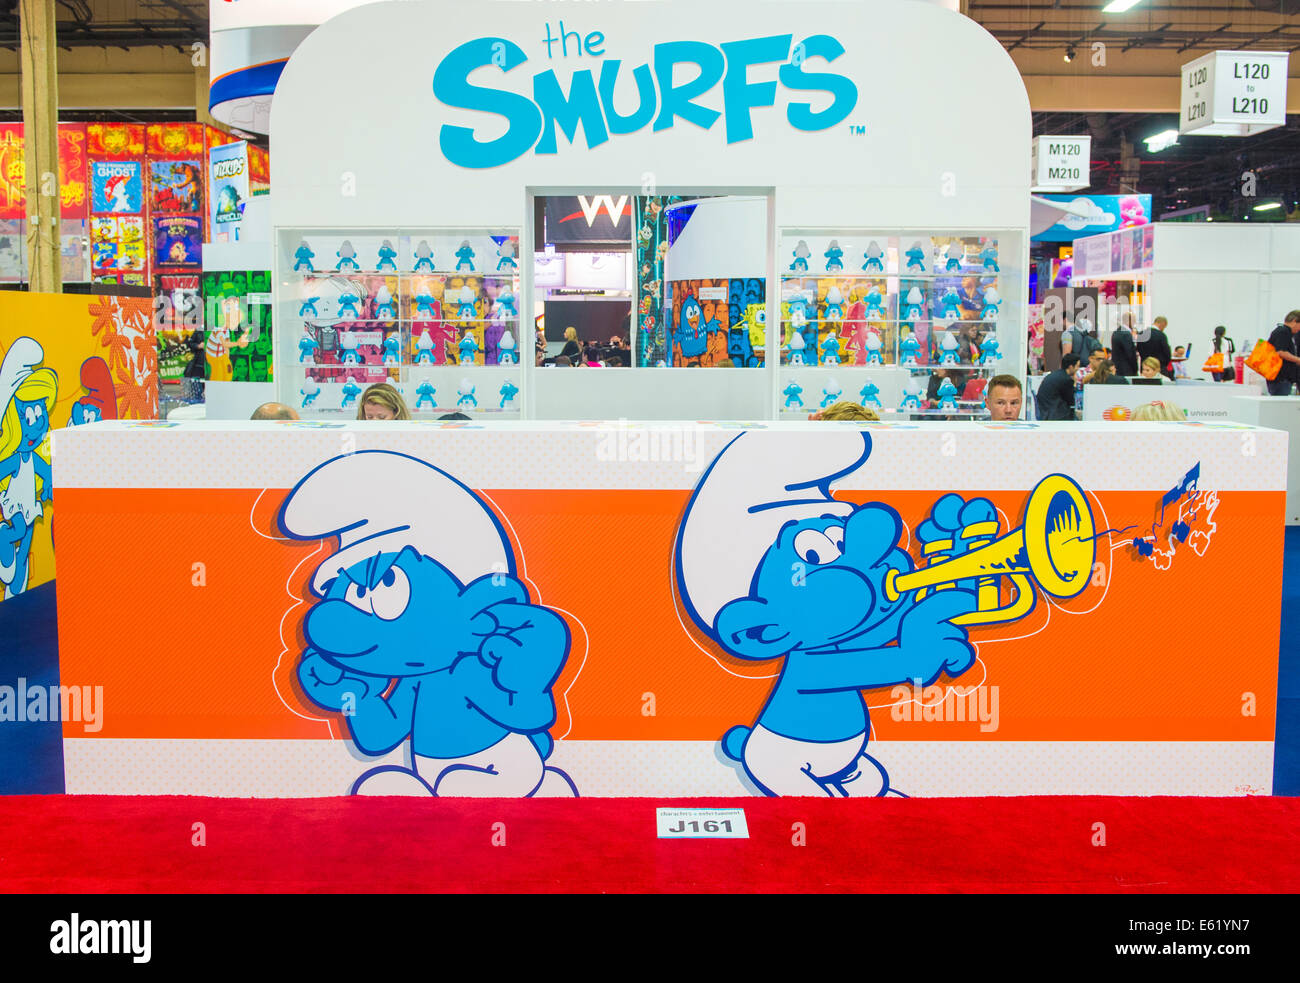 Smurf toy editorial stock photo. Image of houses, cartoon - 81158523